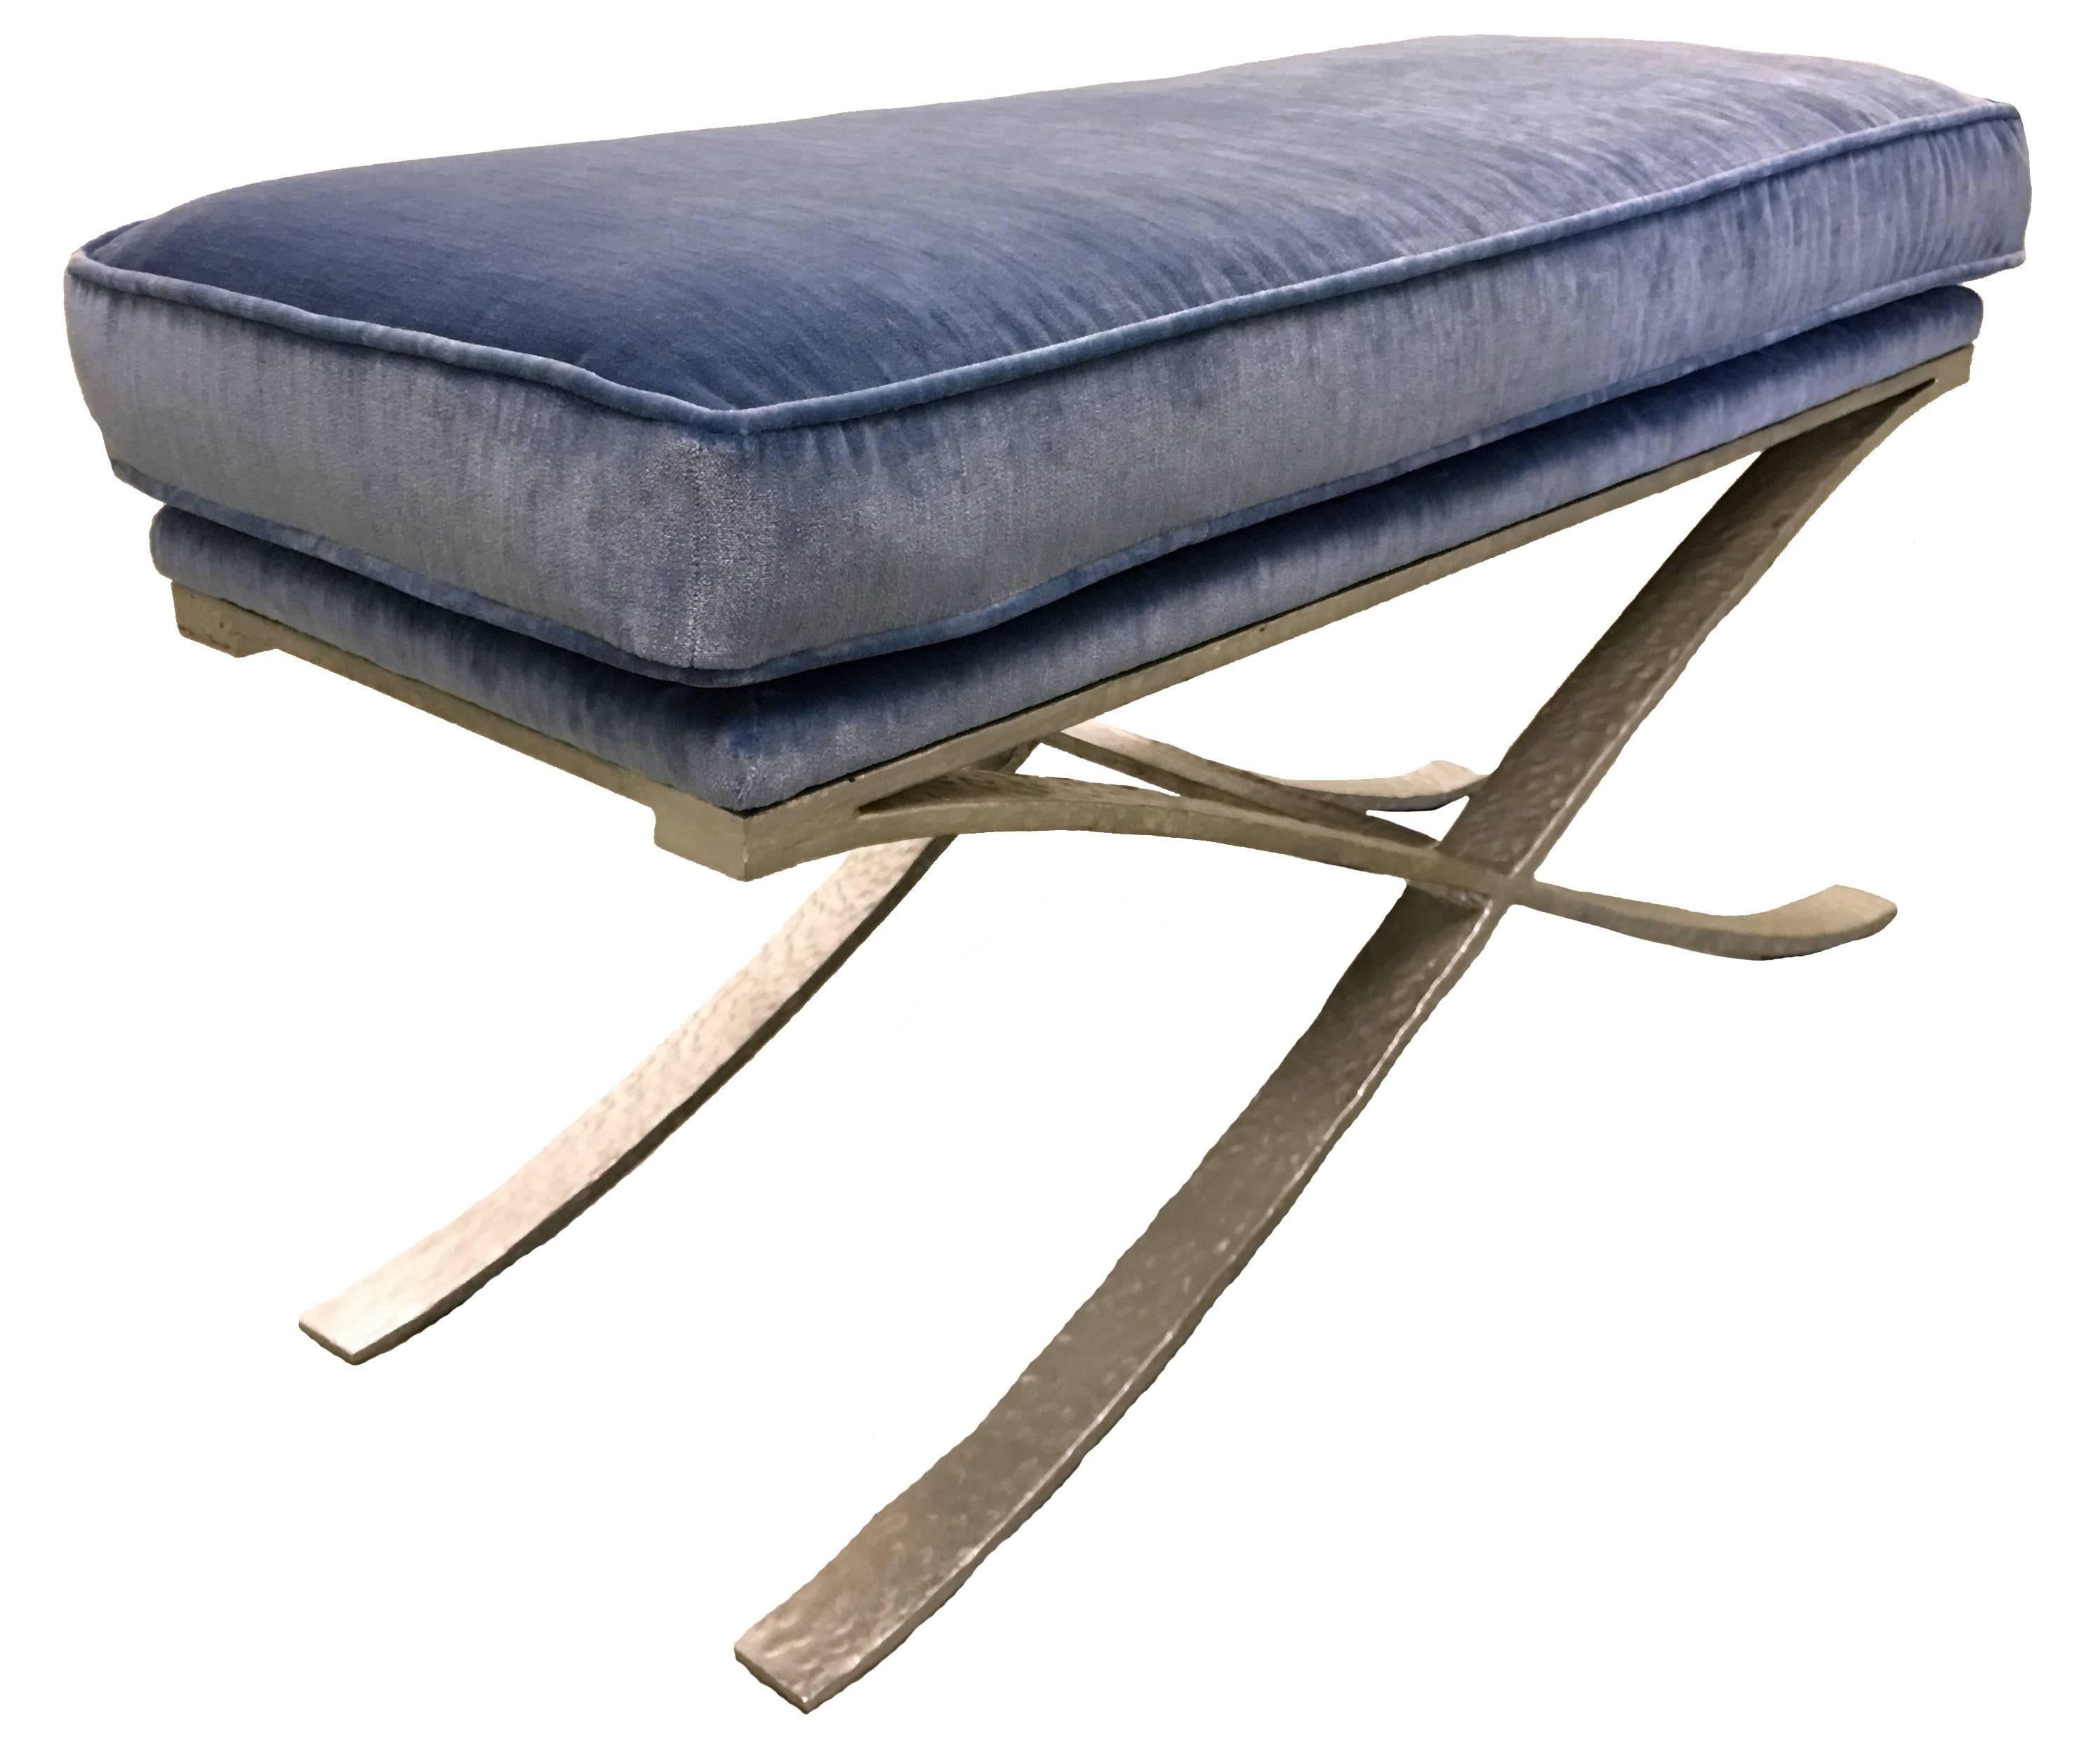 Contemporary silver hammered metal X-bench. Faux silver leaf painted finish over hammered steel frame. Very heavy solid construction. Newly upholstered in Manuel Canovas strie velvet 'Marmande' in Mer (blue).